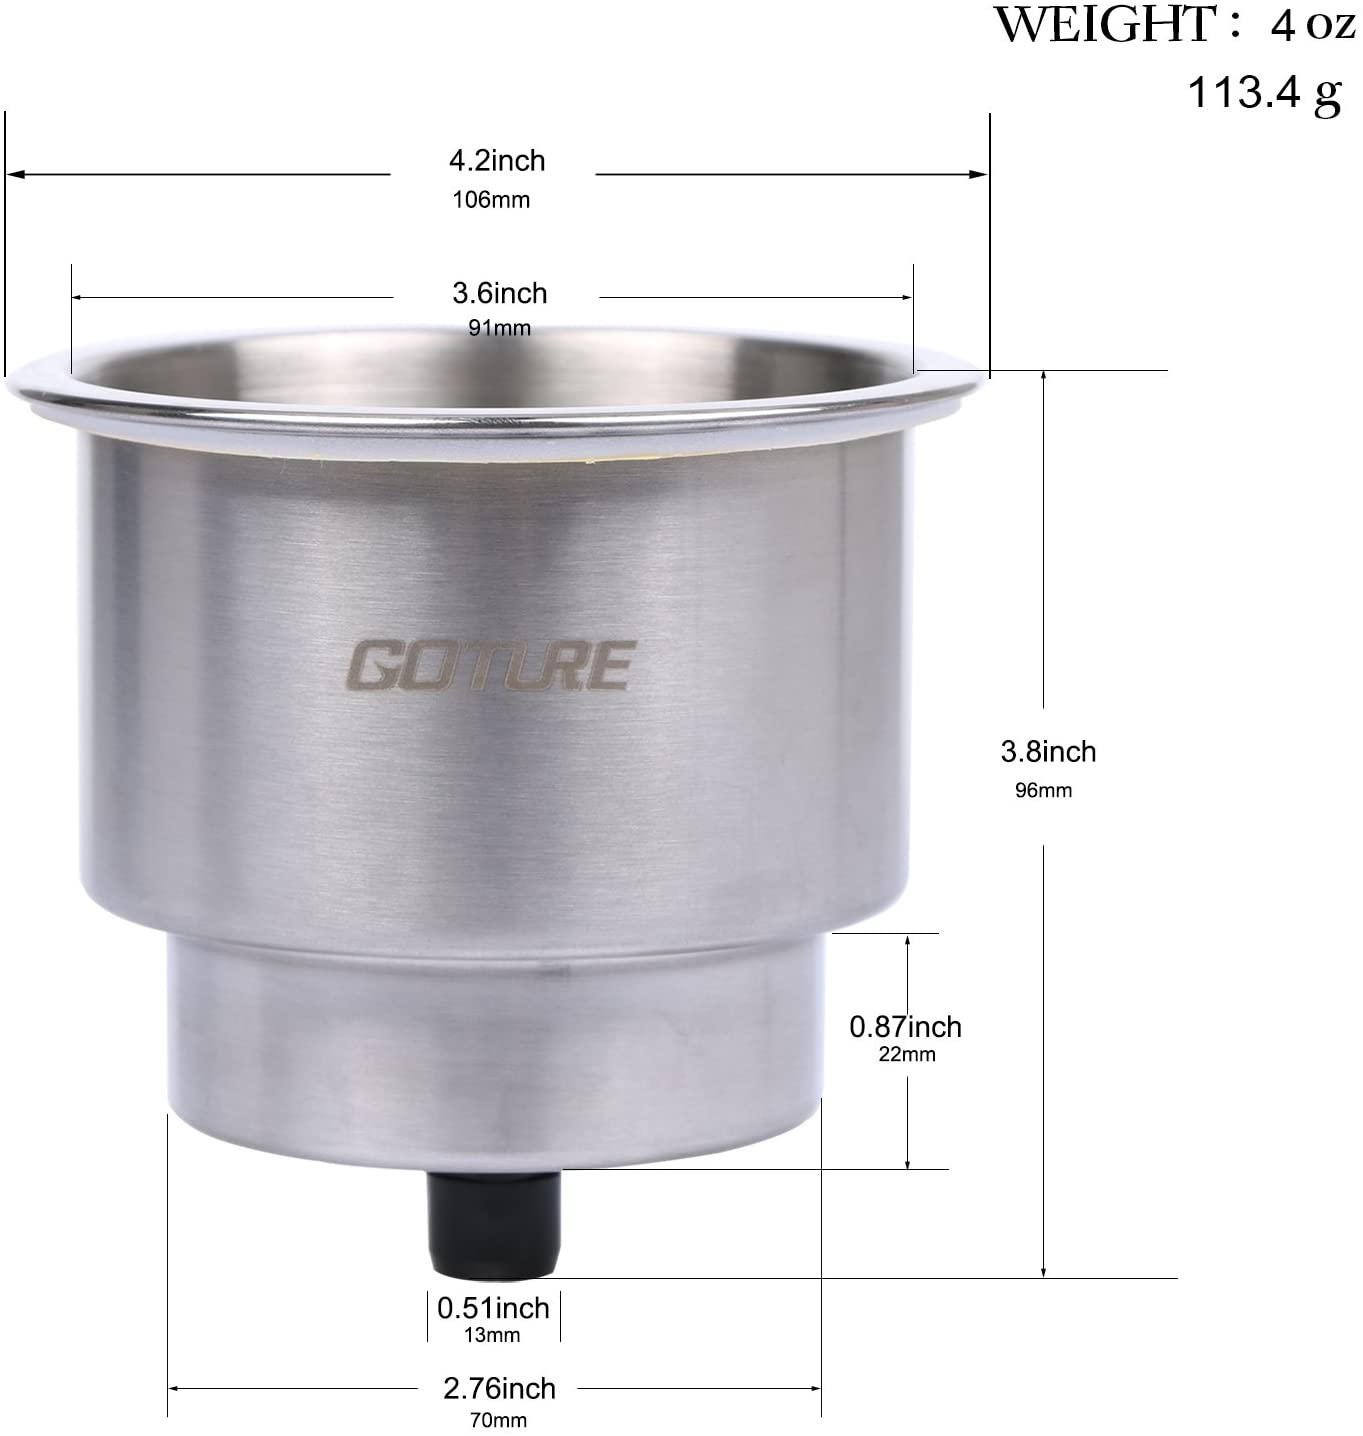 Goture Stainless Steel Cup Drink Holder with Drain Marine Boat Rv